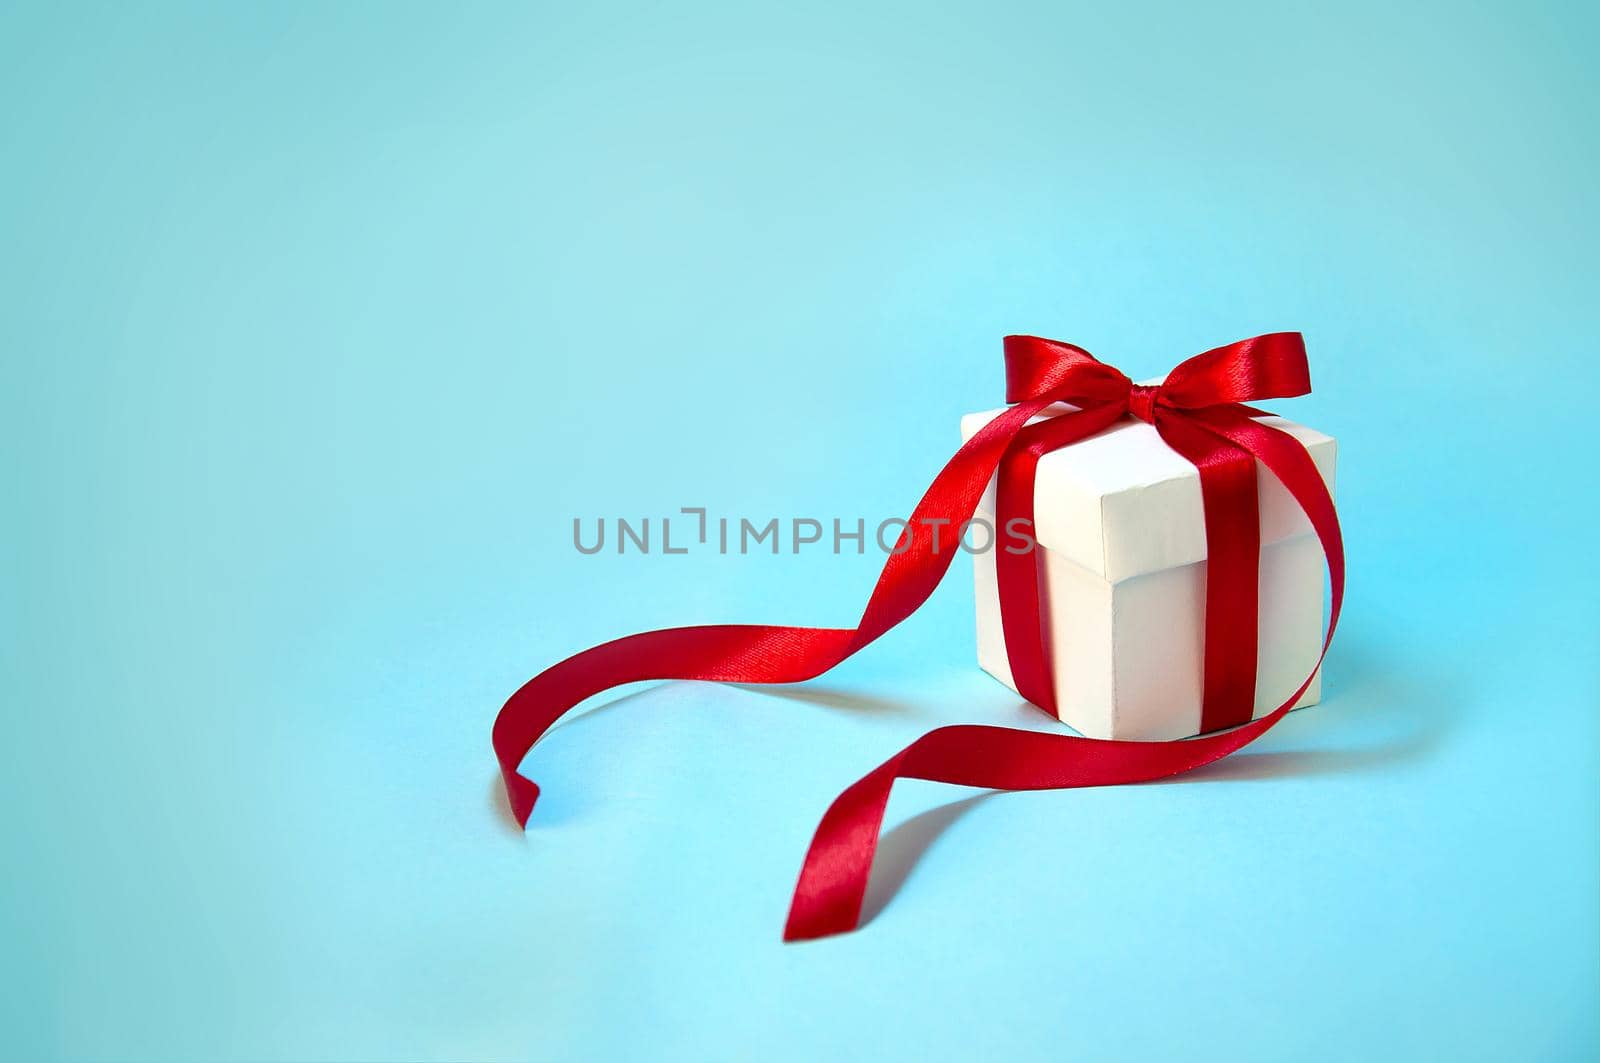 Christmas Gift's in White Box with Red Ribbon on Light Blue Background. New Year Holiday Composition Banner. Copy Space For Your Text